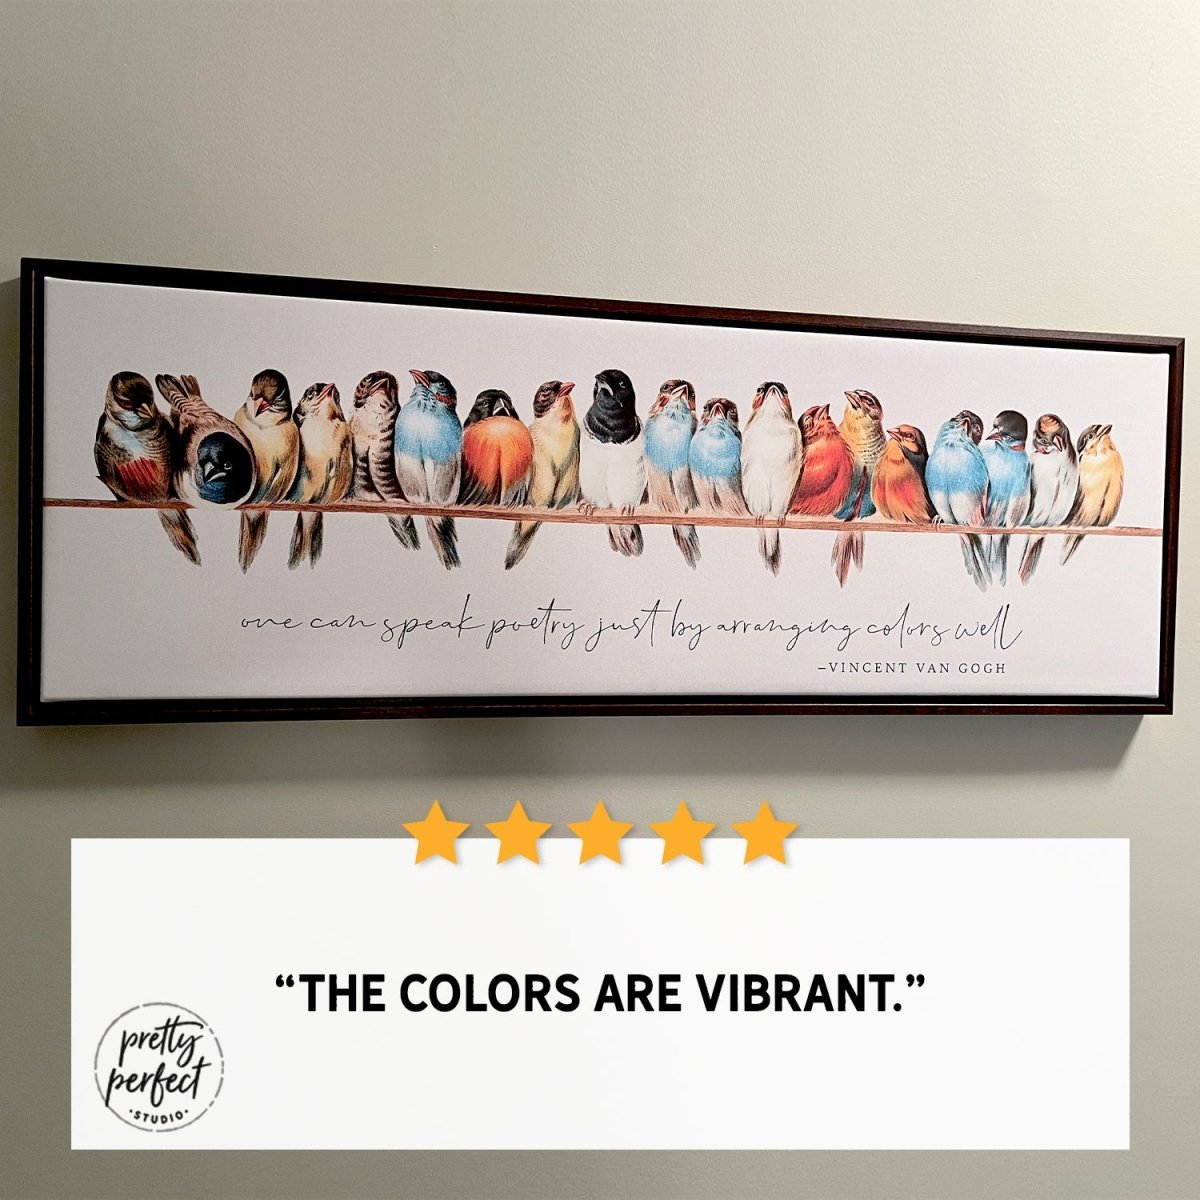 Customer product review for Birds On A Wire Wall Art Canvas by Pretty Perfect Studio